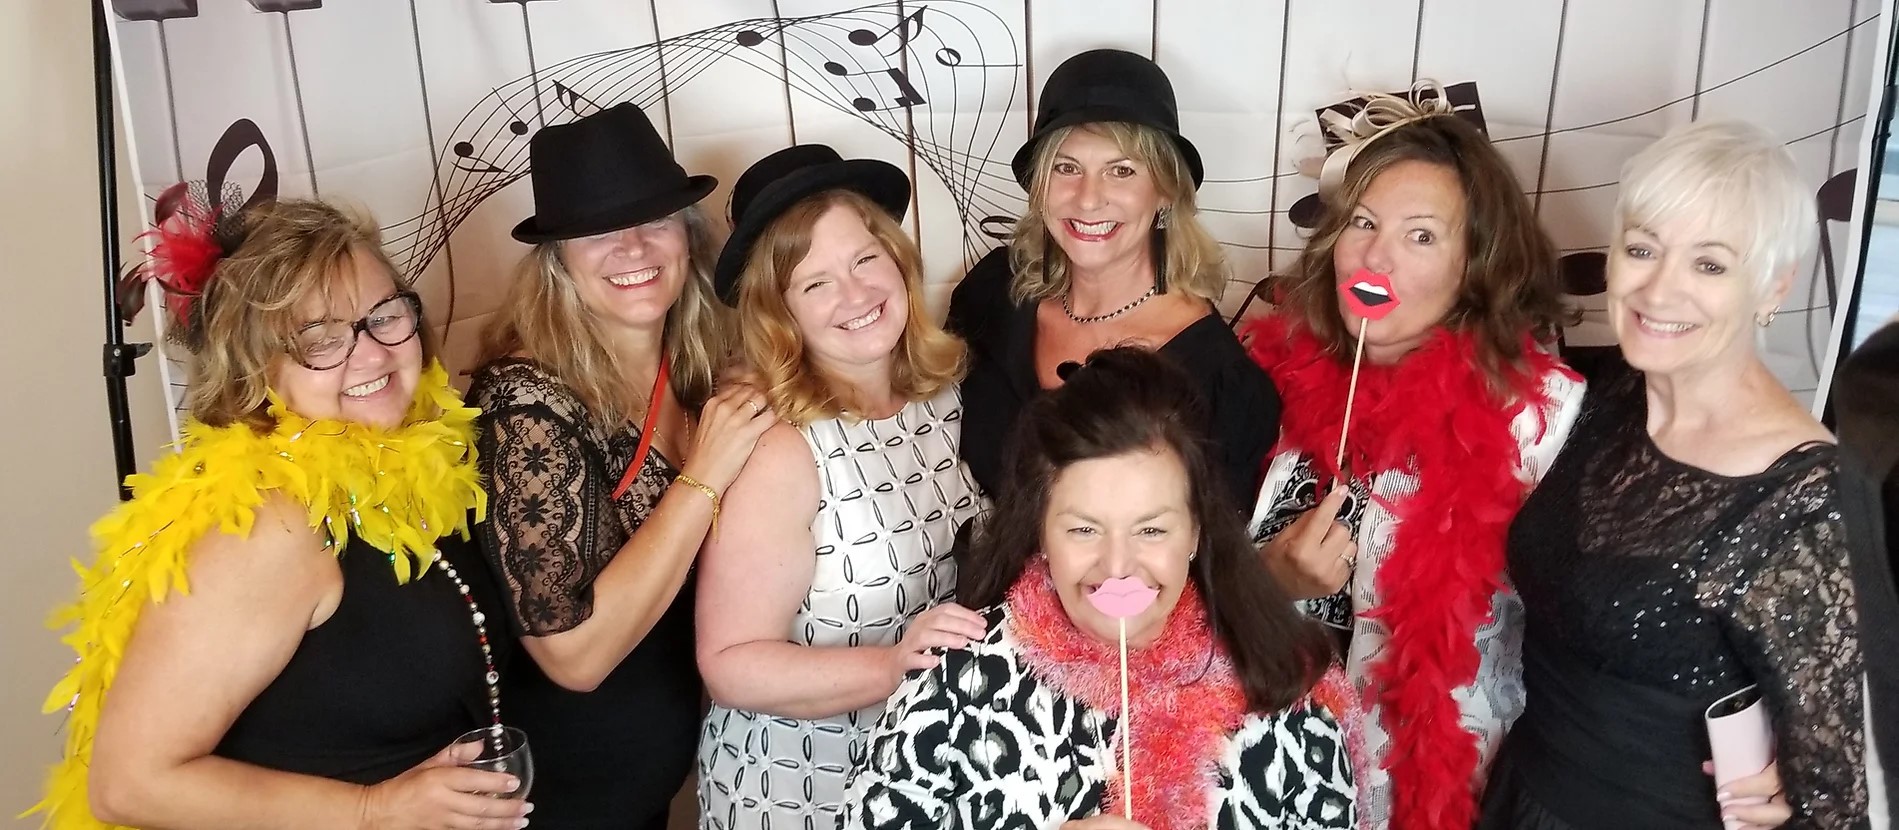 seven white mature women posing with hats and other props in front of a backdrop with musical symbols on it